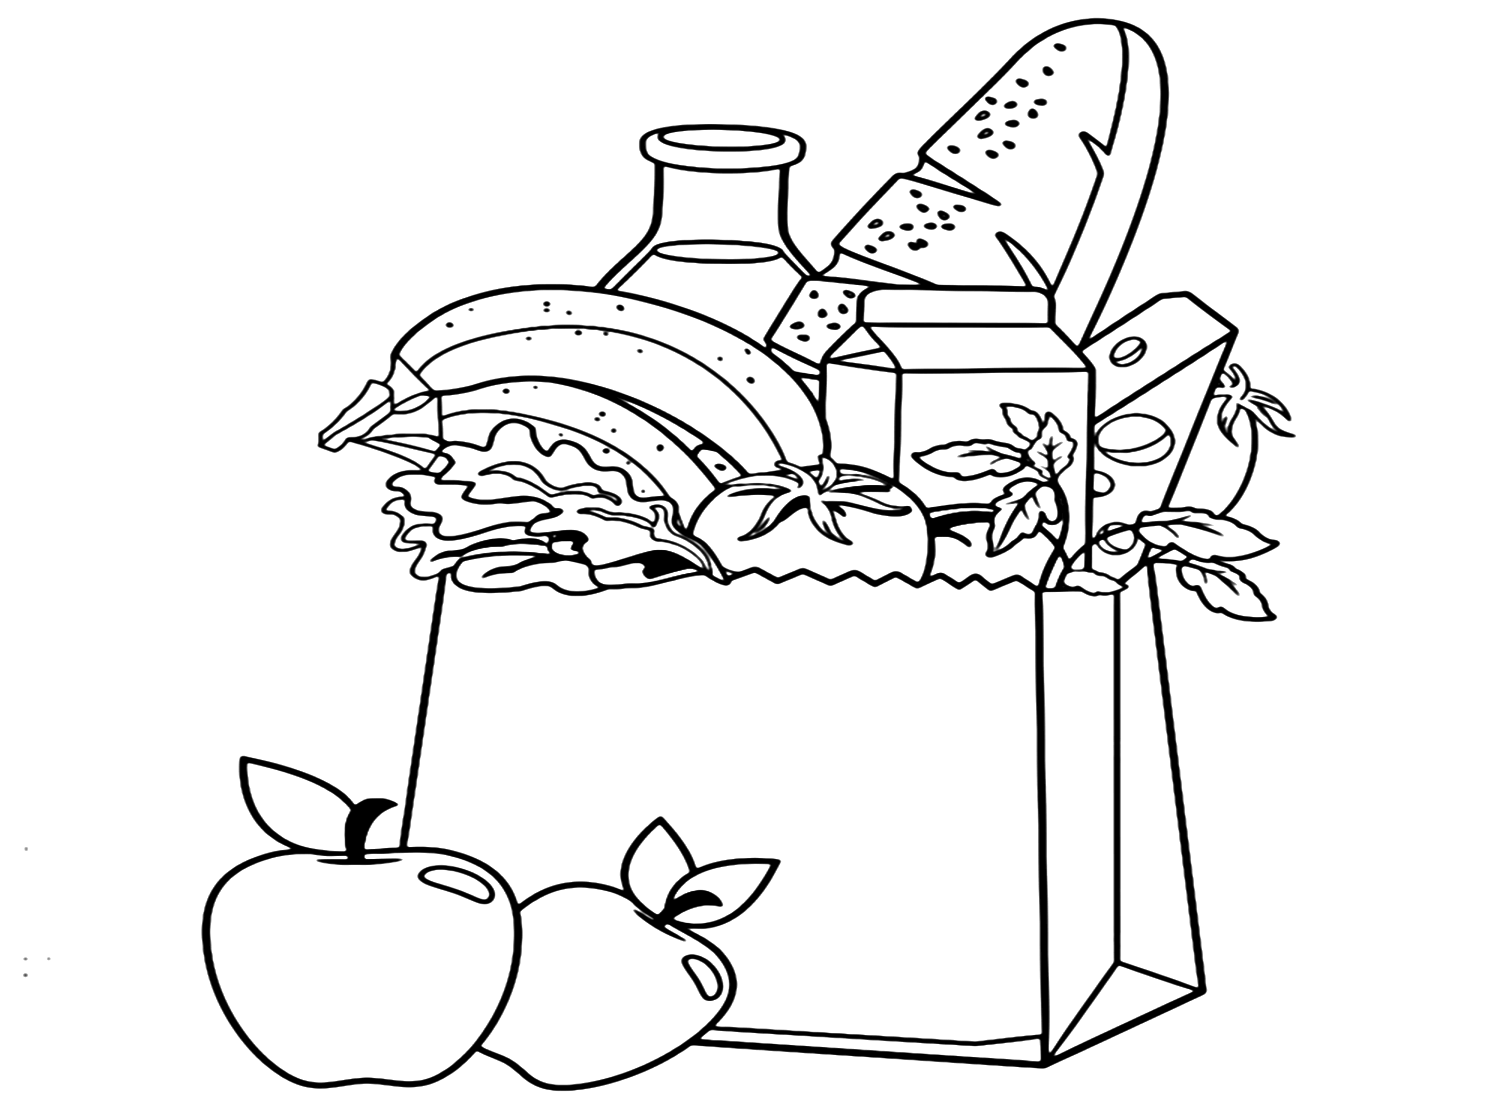 Printable Tomato Coloring Pages